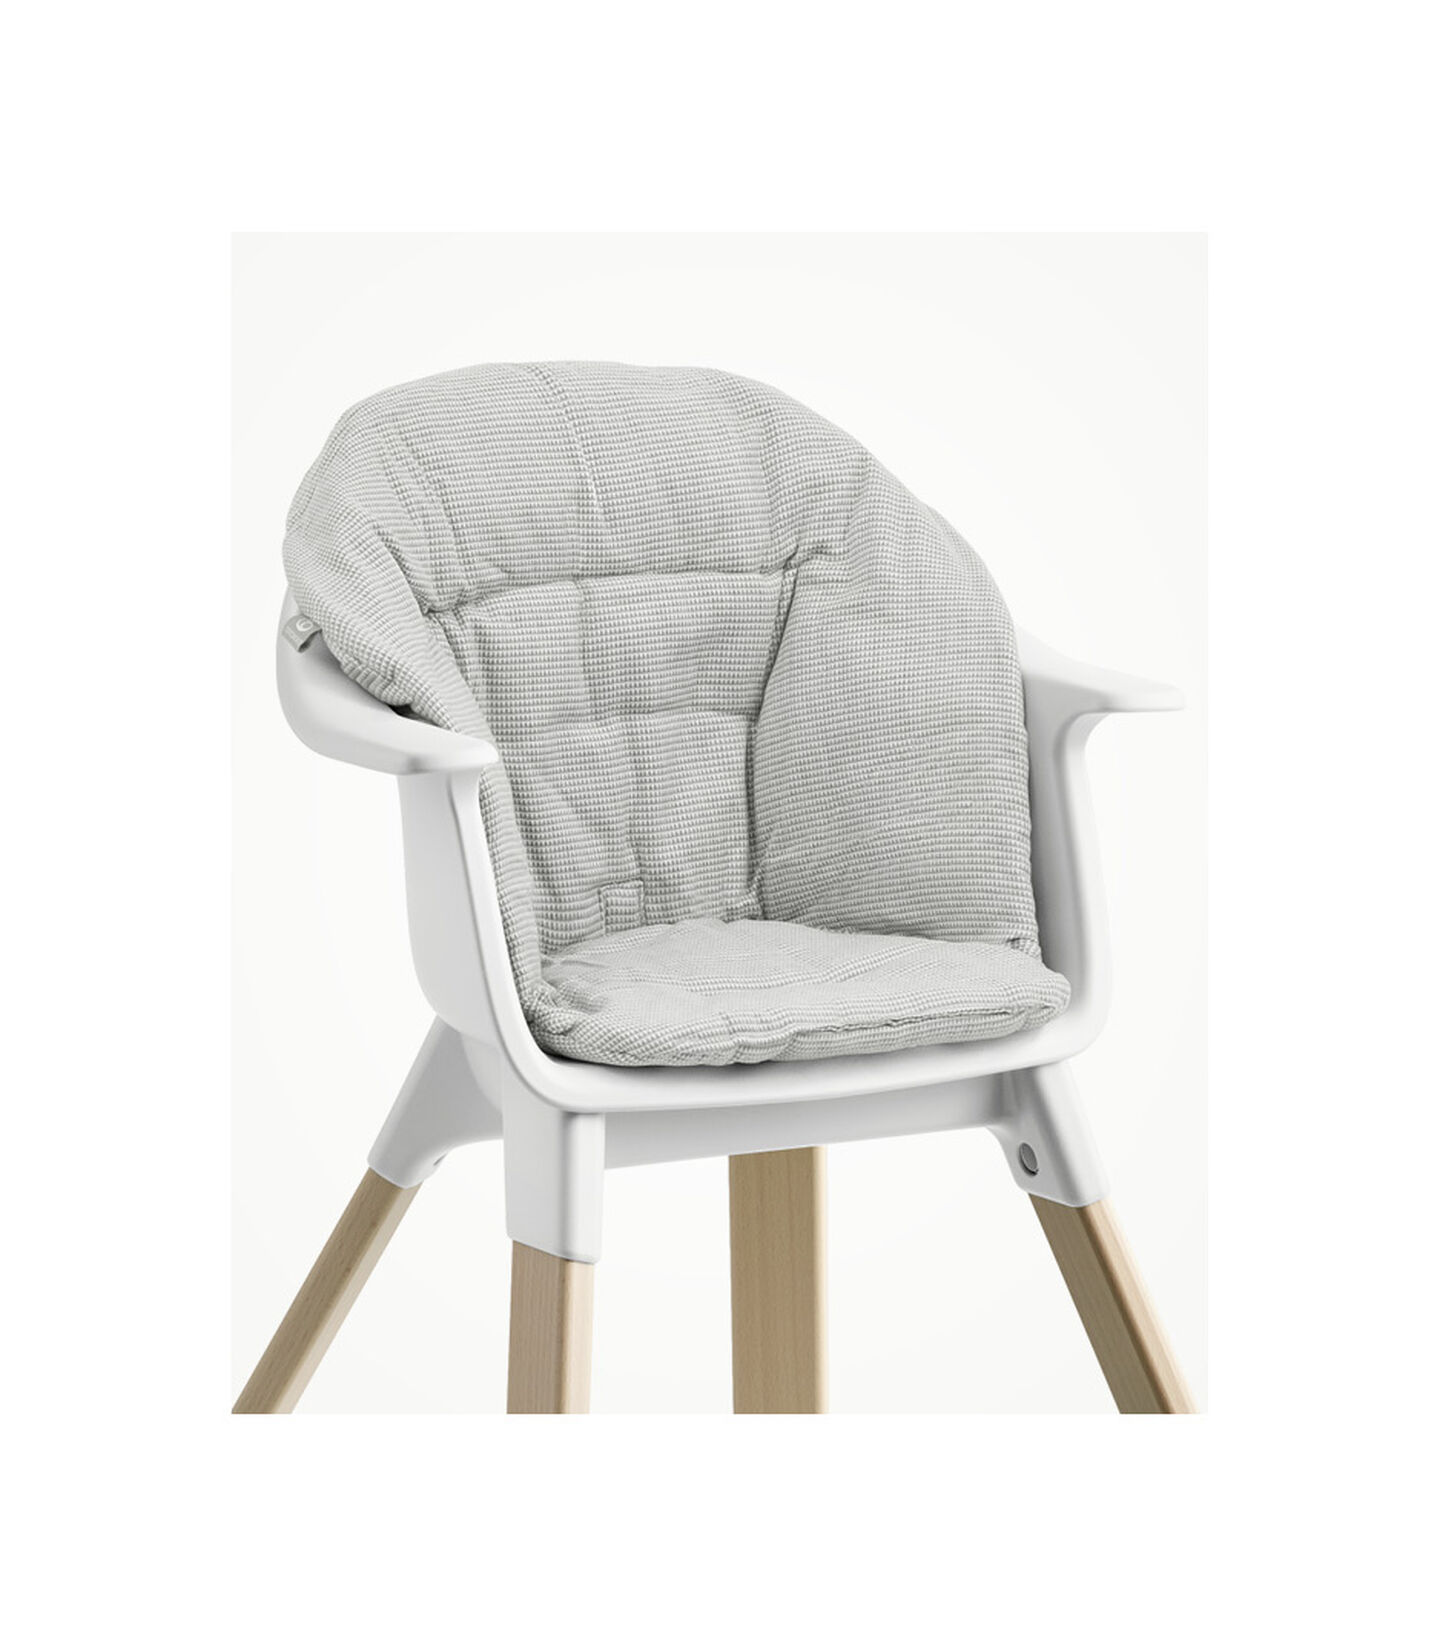 Stokke® Clikk™ High Chair with Tray and Harness, in Natural and White. Cushion Nordic Grey. view 3